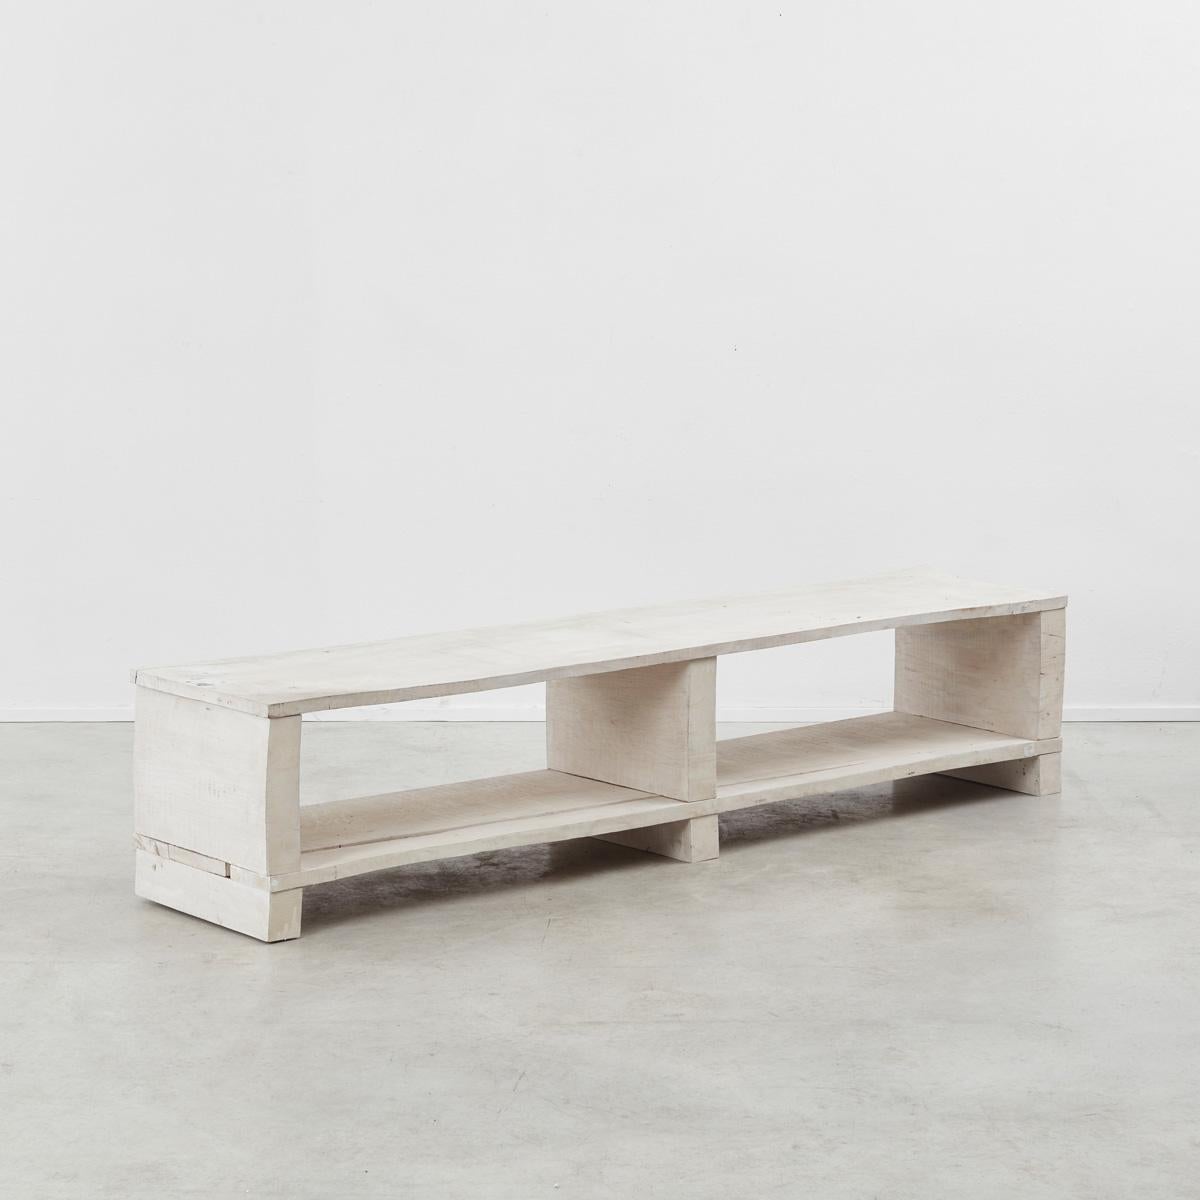 Jim Partridge (1953-) and Liz Walmsley (1952-) started collaborating in 1986. Carved from blocks of green oak and then stained in a white finish, the shelving unit’s light tone yet solid aesthetic follows their intention to make “work with a strong